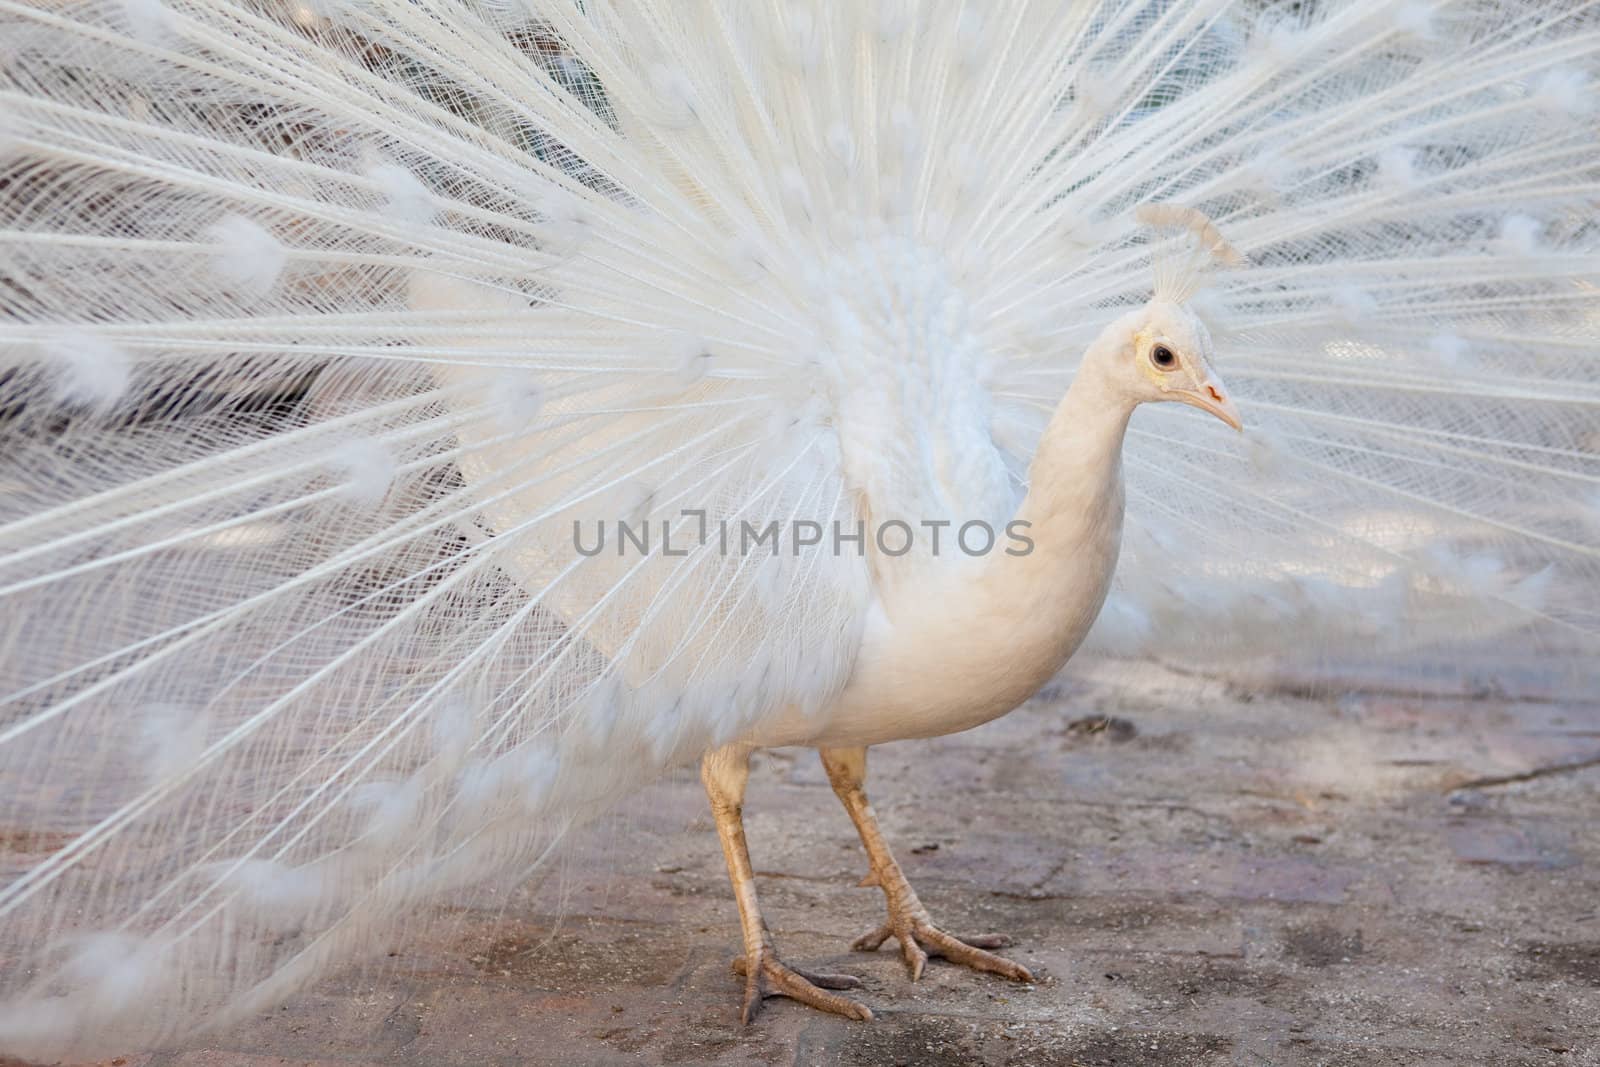 a peacock with white plumage